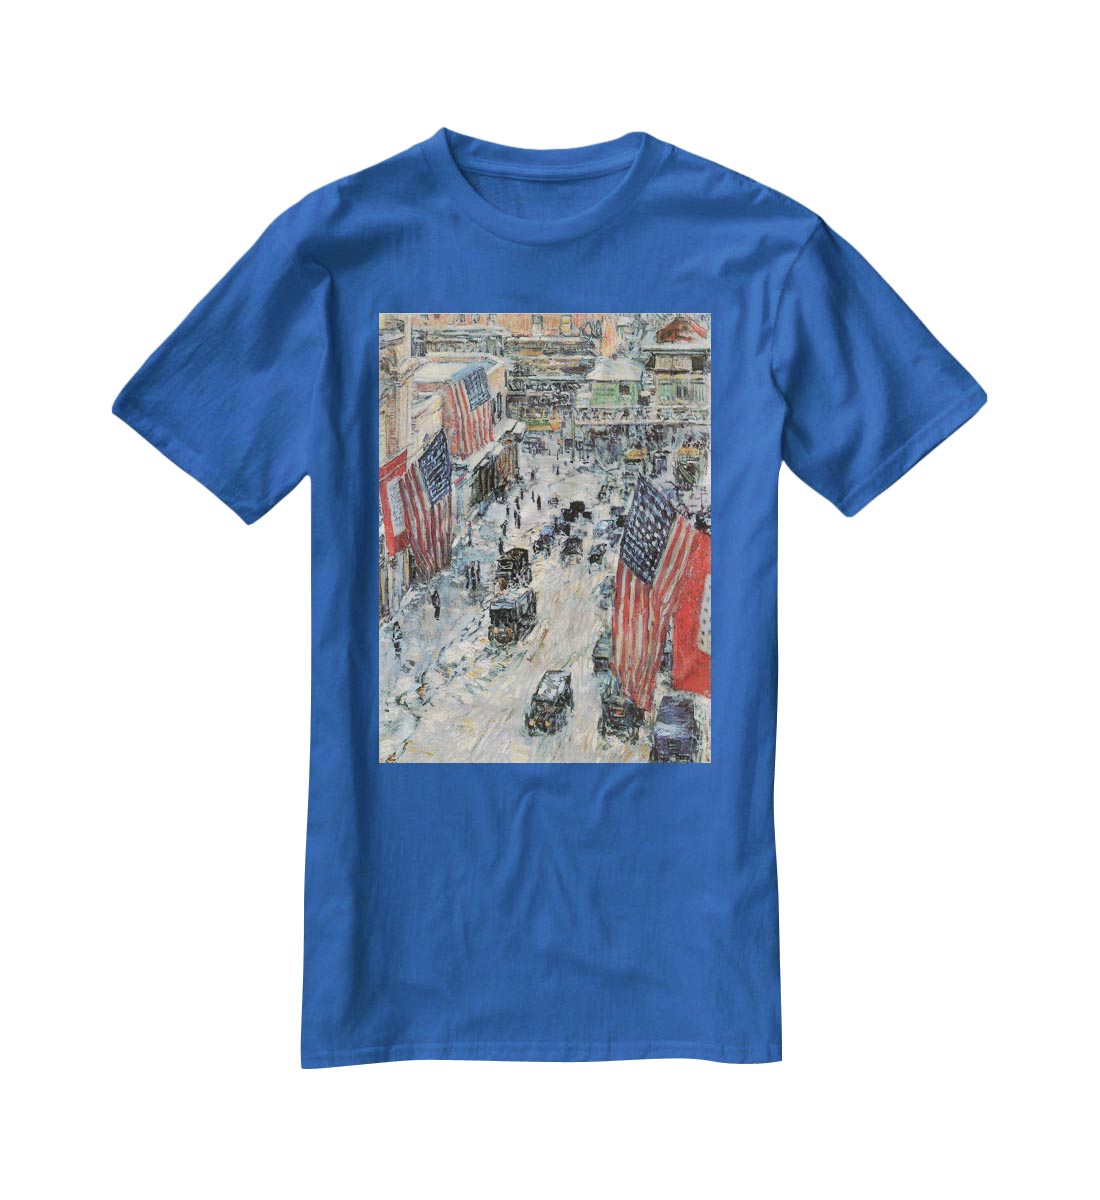 Flags on Fifth Avenue Winter 1918 by Hassam T-Shirt - Canvas Art Rocks - 2